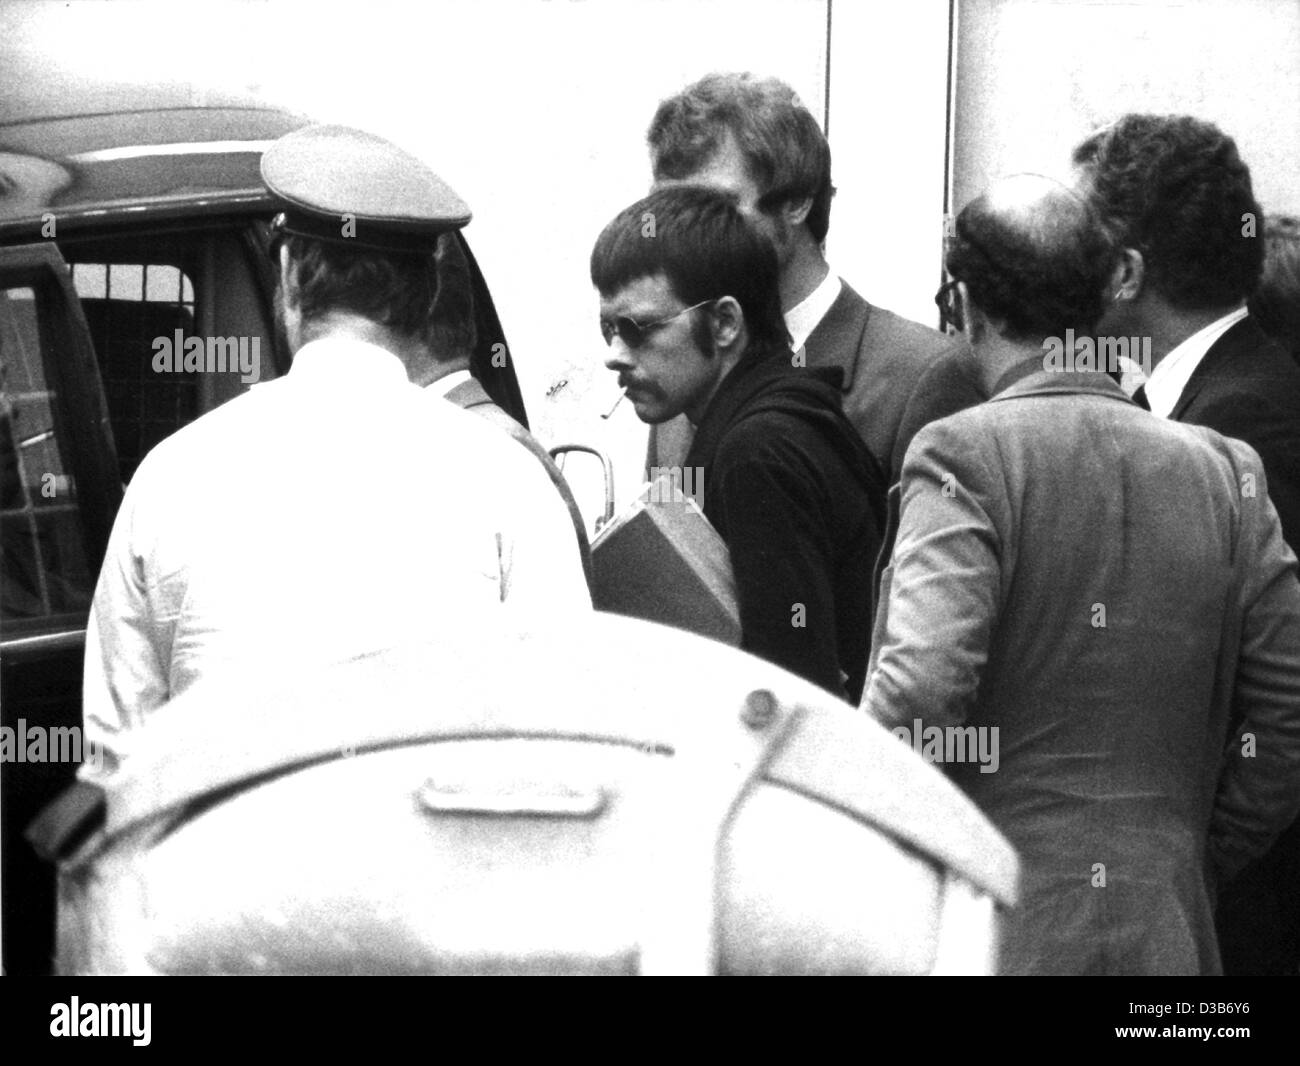 (dpa files) - German terrorist Jan Carl Raspe steps into the car to bring him back to his prison cell during a break of the trial of RAF terrorists Ulrike Meinhof, Andreas Baader and Gudrun Ensslin, on the grounds of Stuttgart's Stammheim prison in 1975. Raspe was with the Baader-Meinhof Gang from t Stock Photo